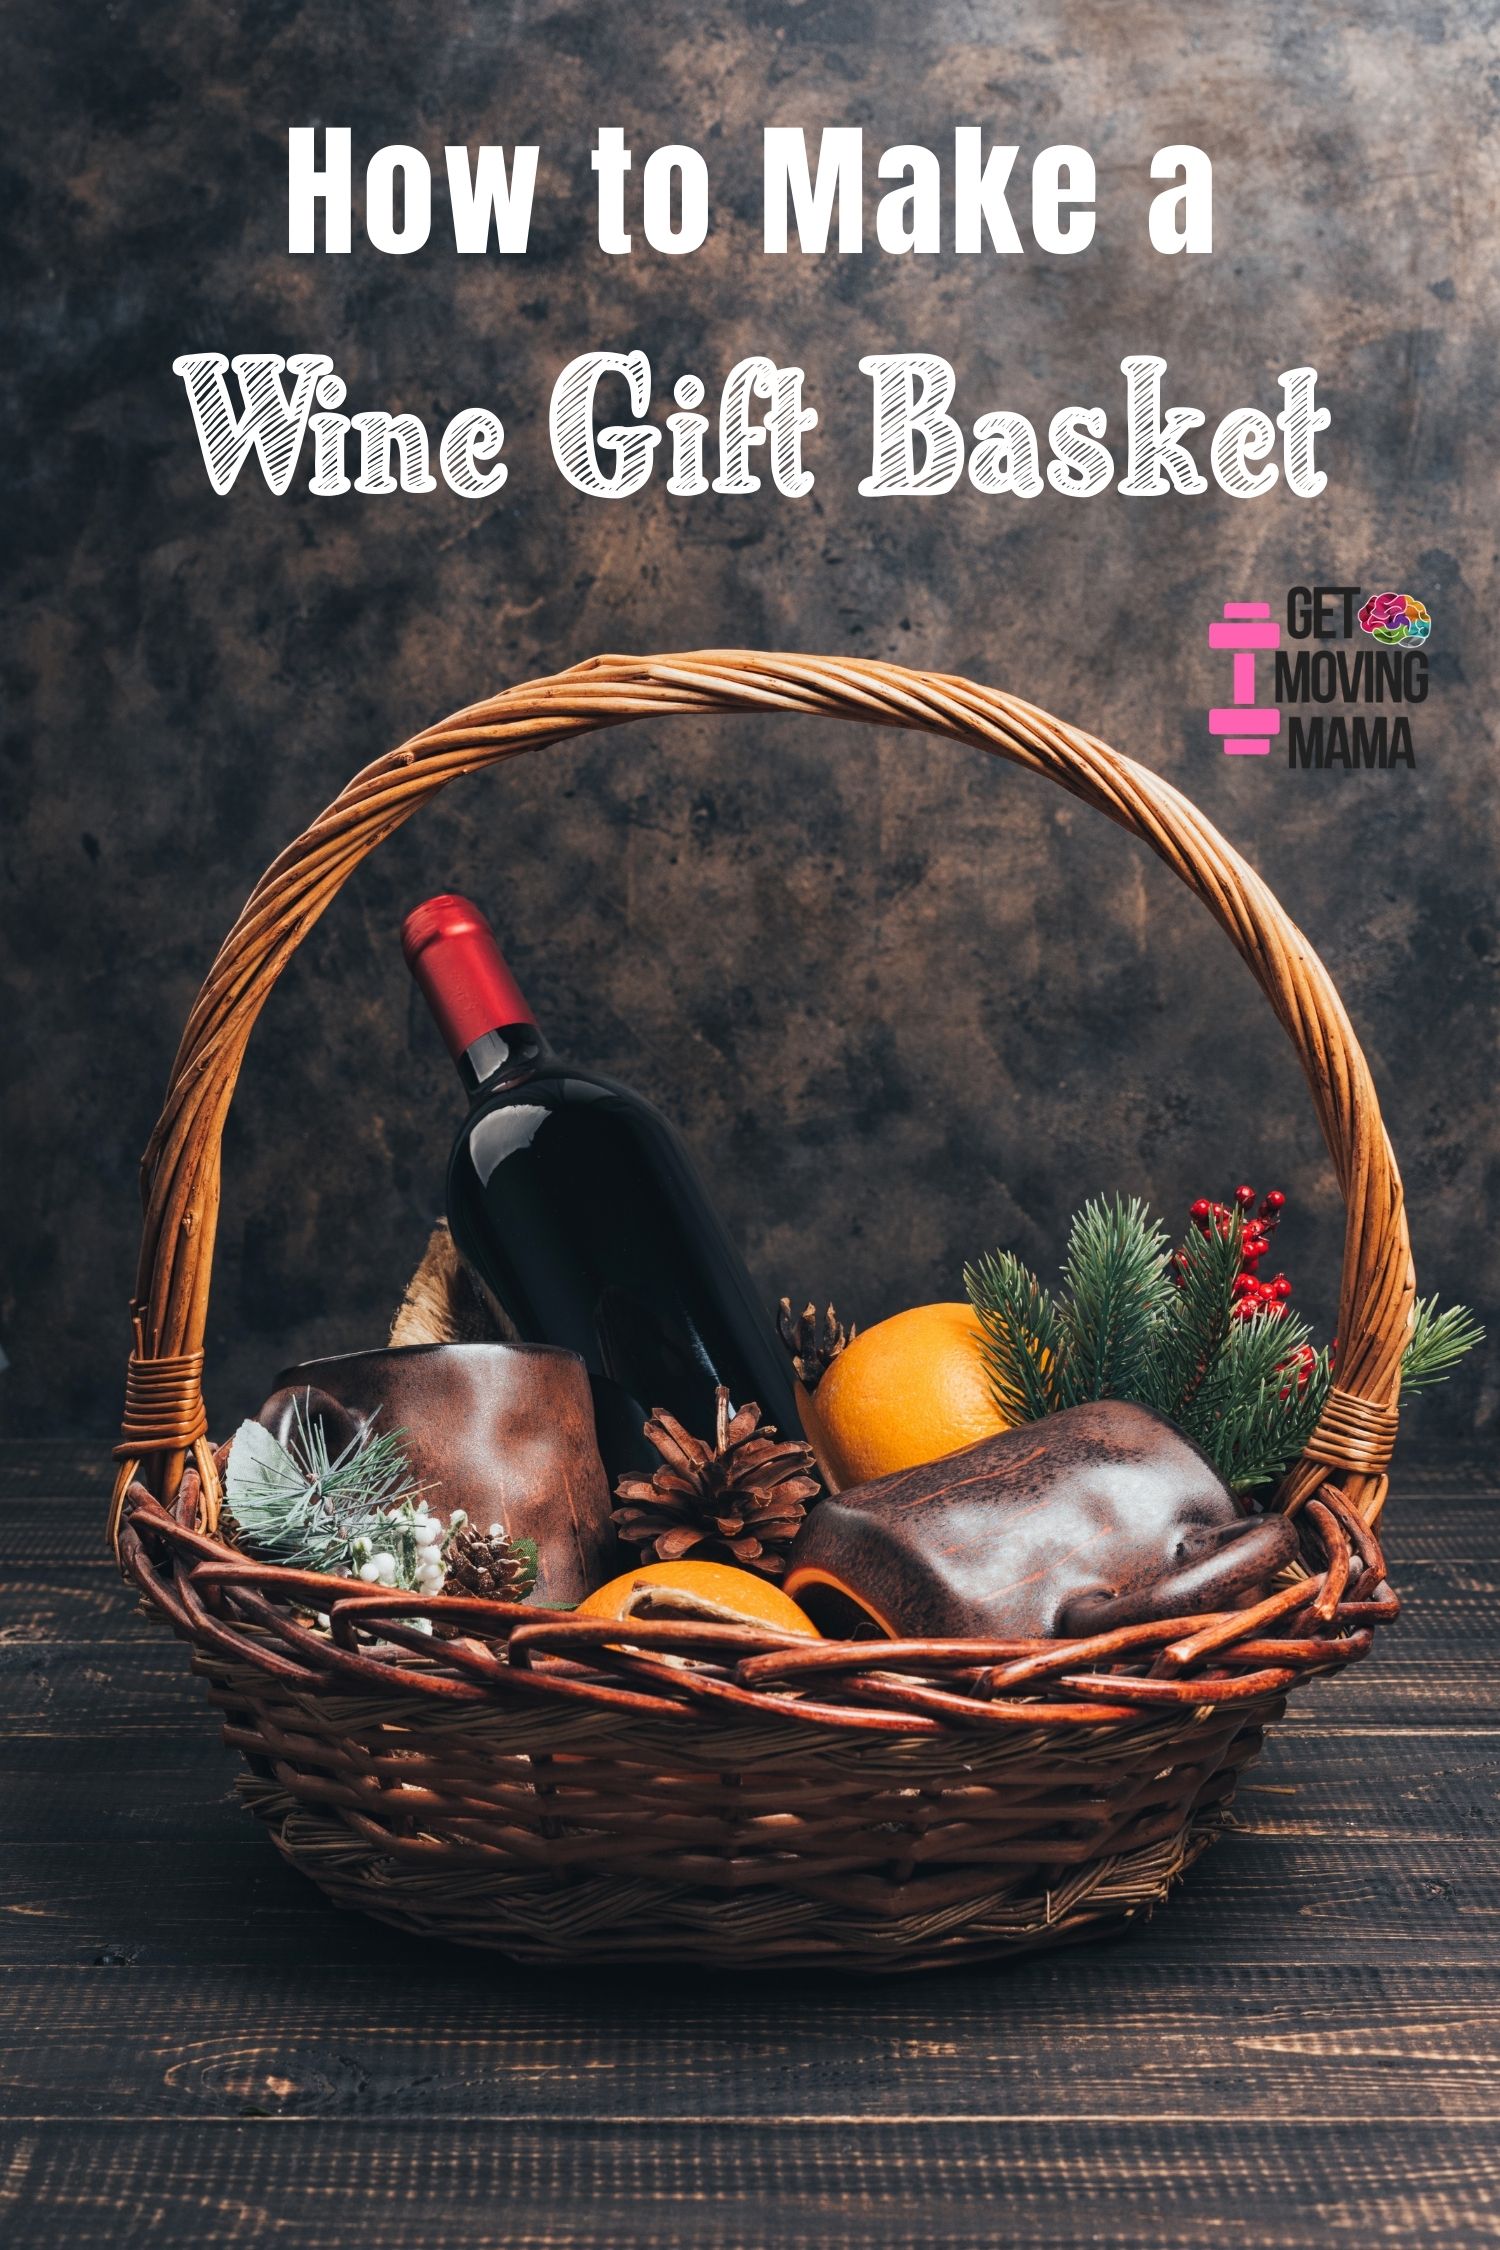 A picture of a diy wine gift basket for Christmas.